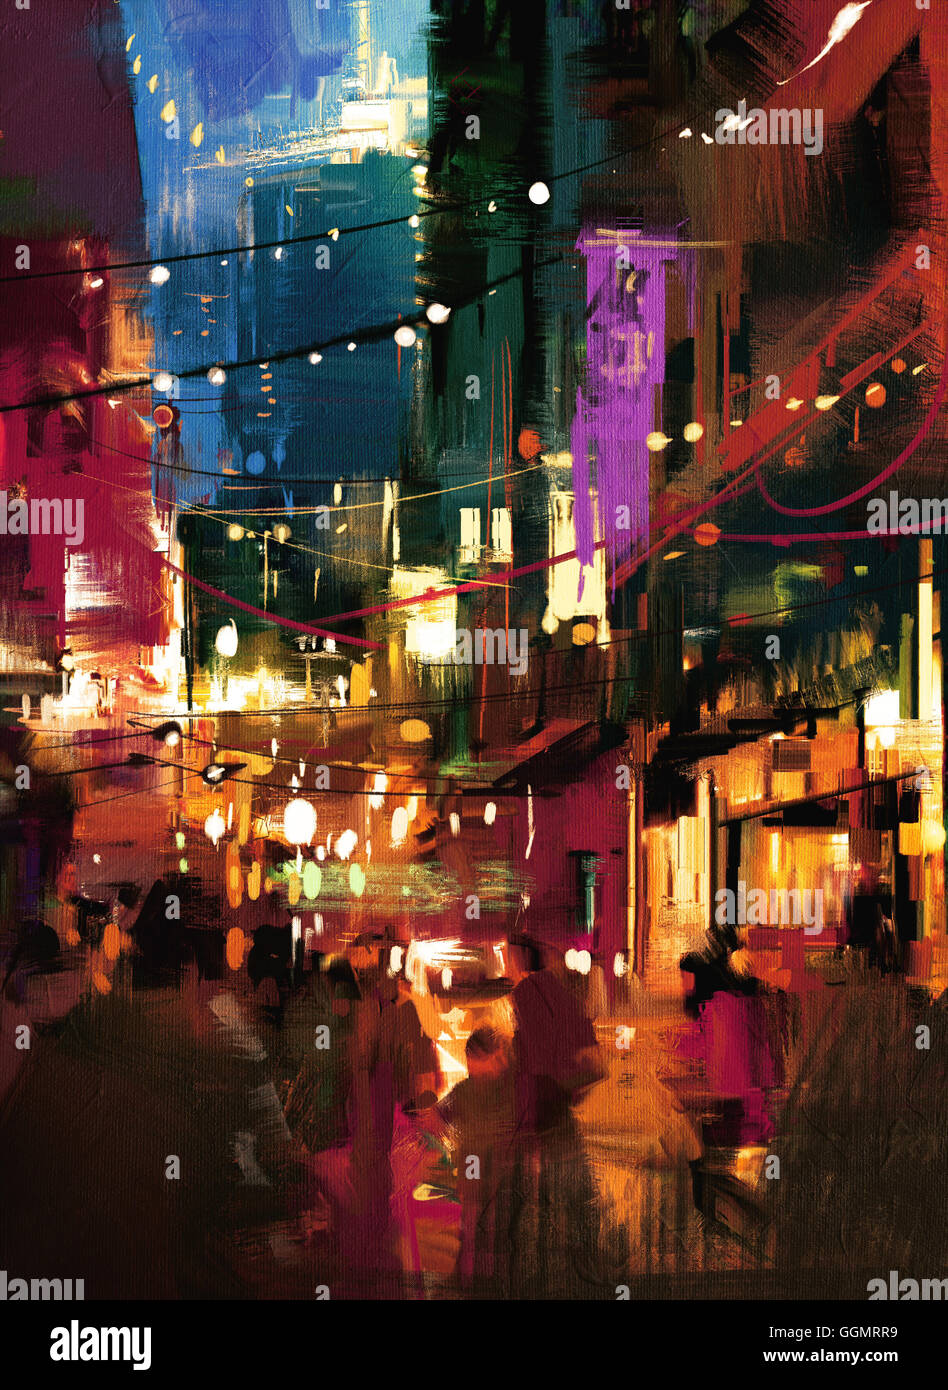 colorful painting of shopping street at night Stock Photo